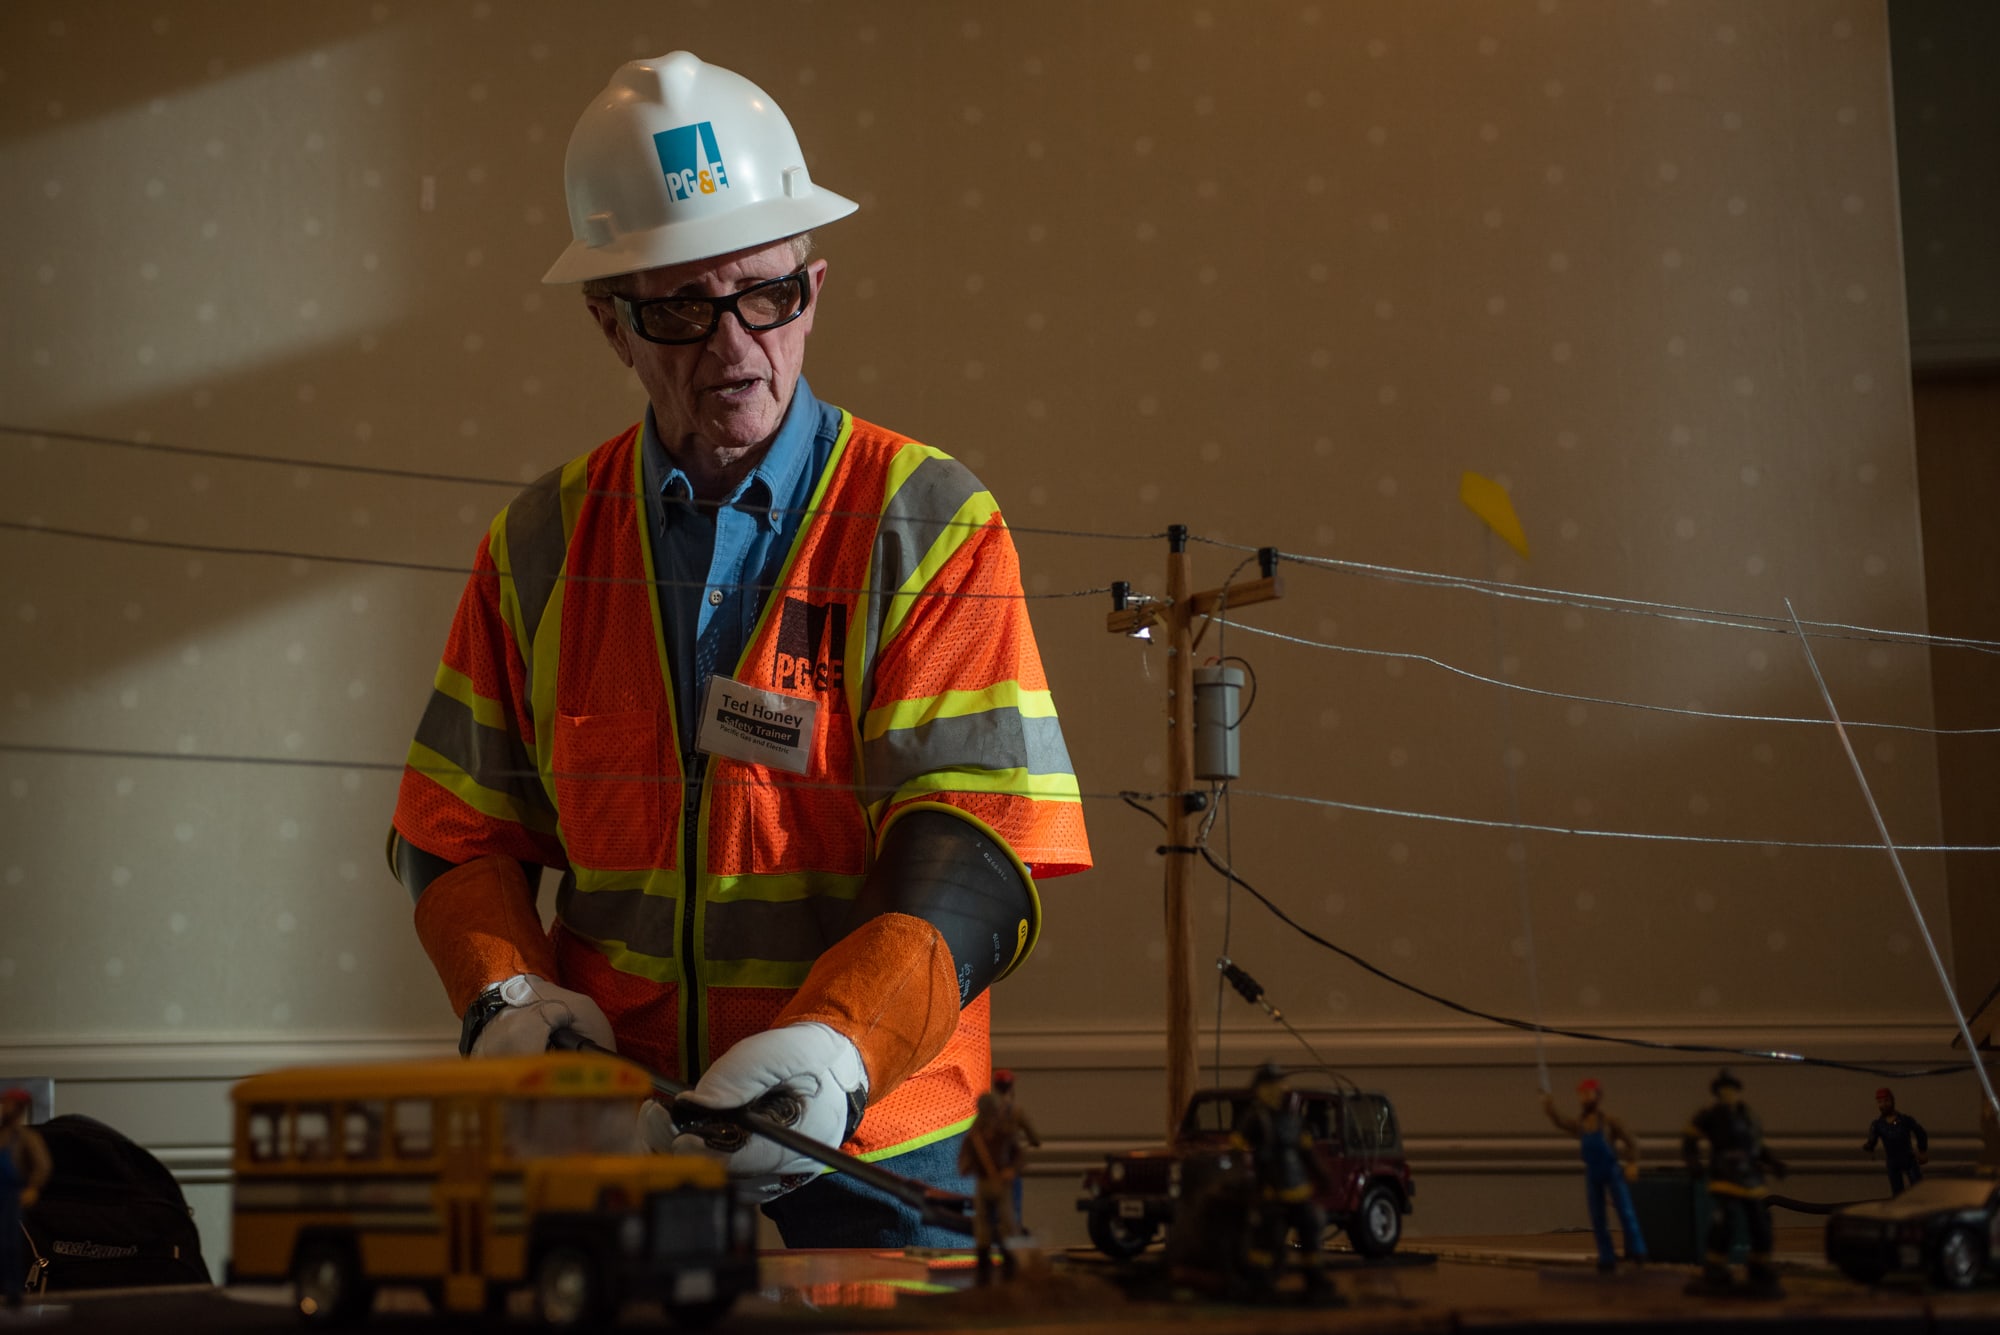 Ted Honey, a safety trainer of Pacific Gas & Electric, California's largest utility company, demonstrated the dangers of a downed power line at a PG&E open house in Redding, California. (Anton Delgado/News21)